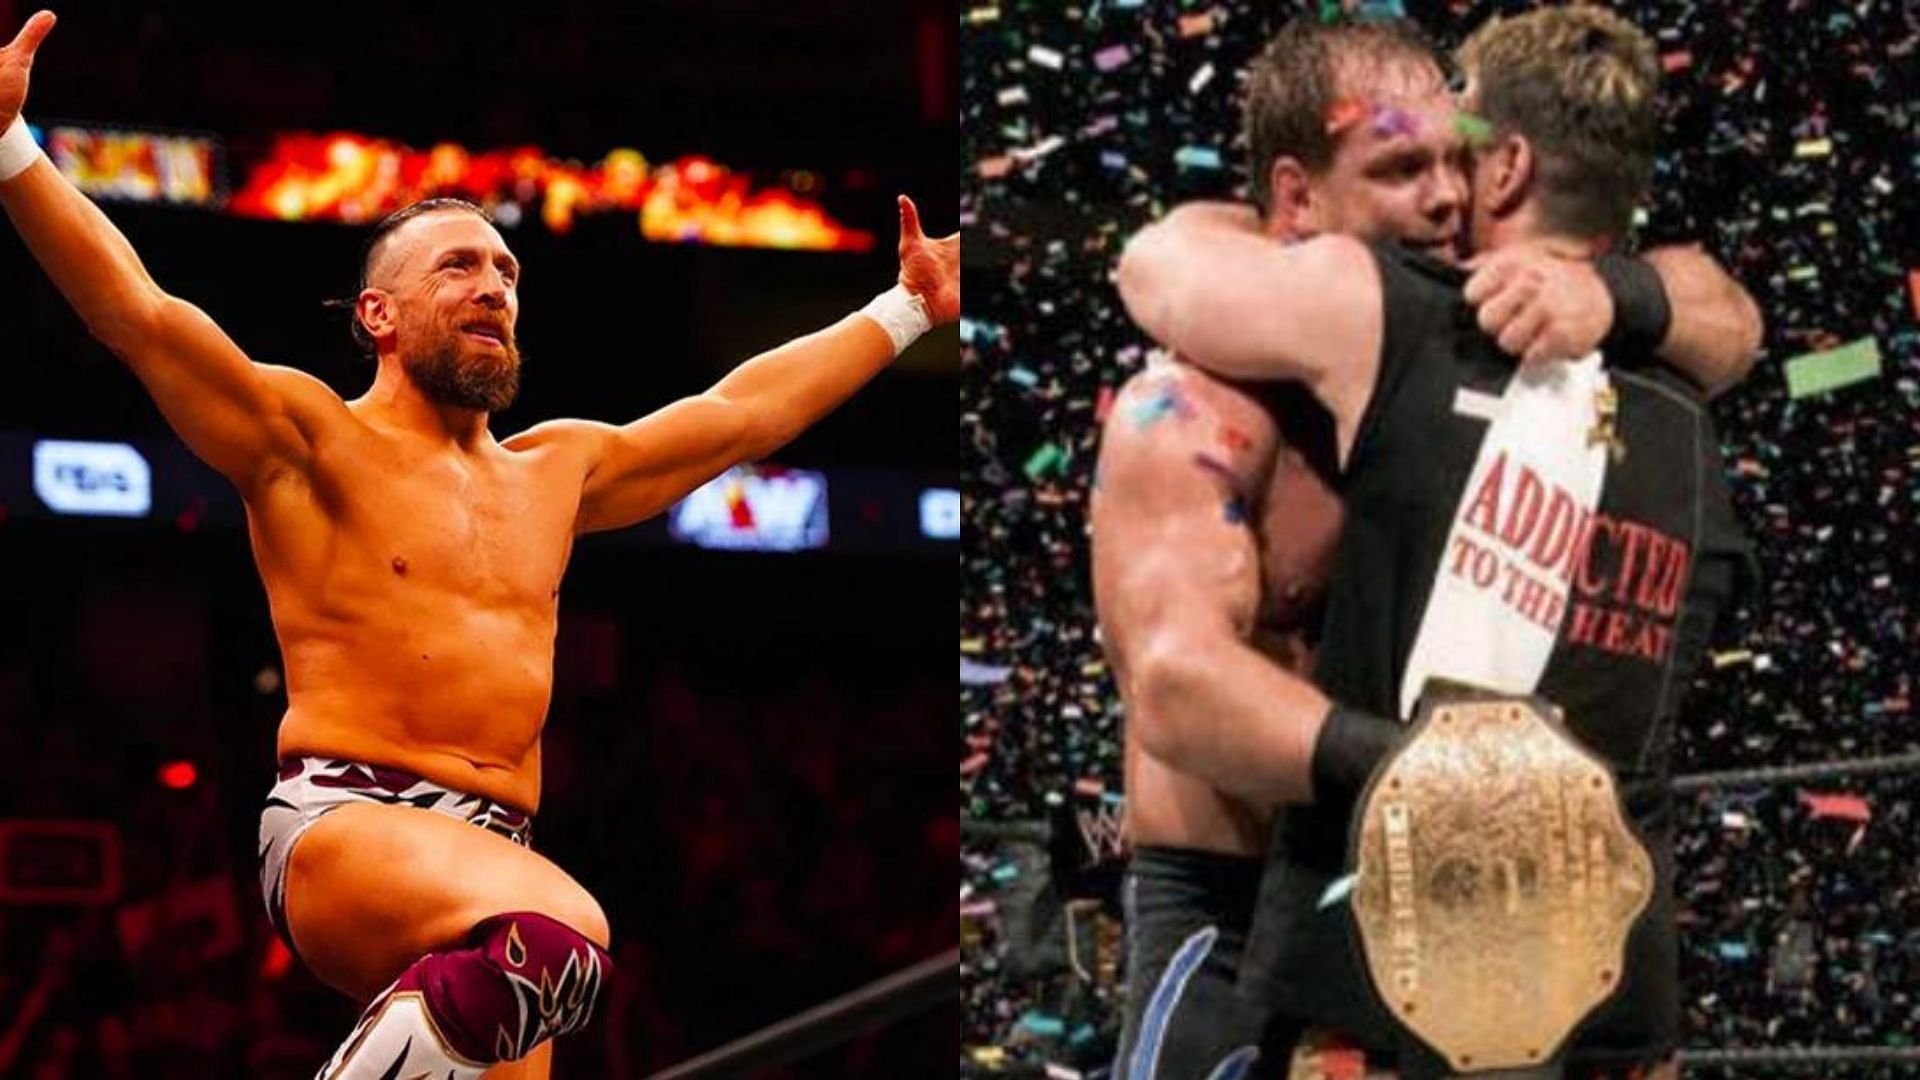 Bryan Danielson recently made his return to in-ring action!